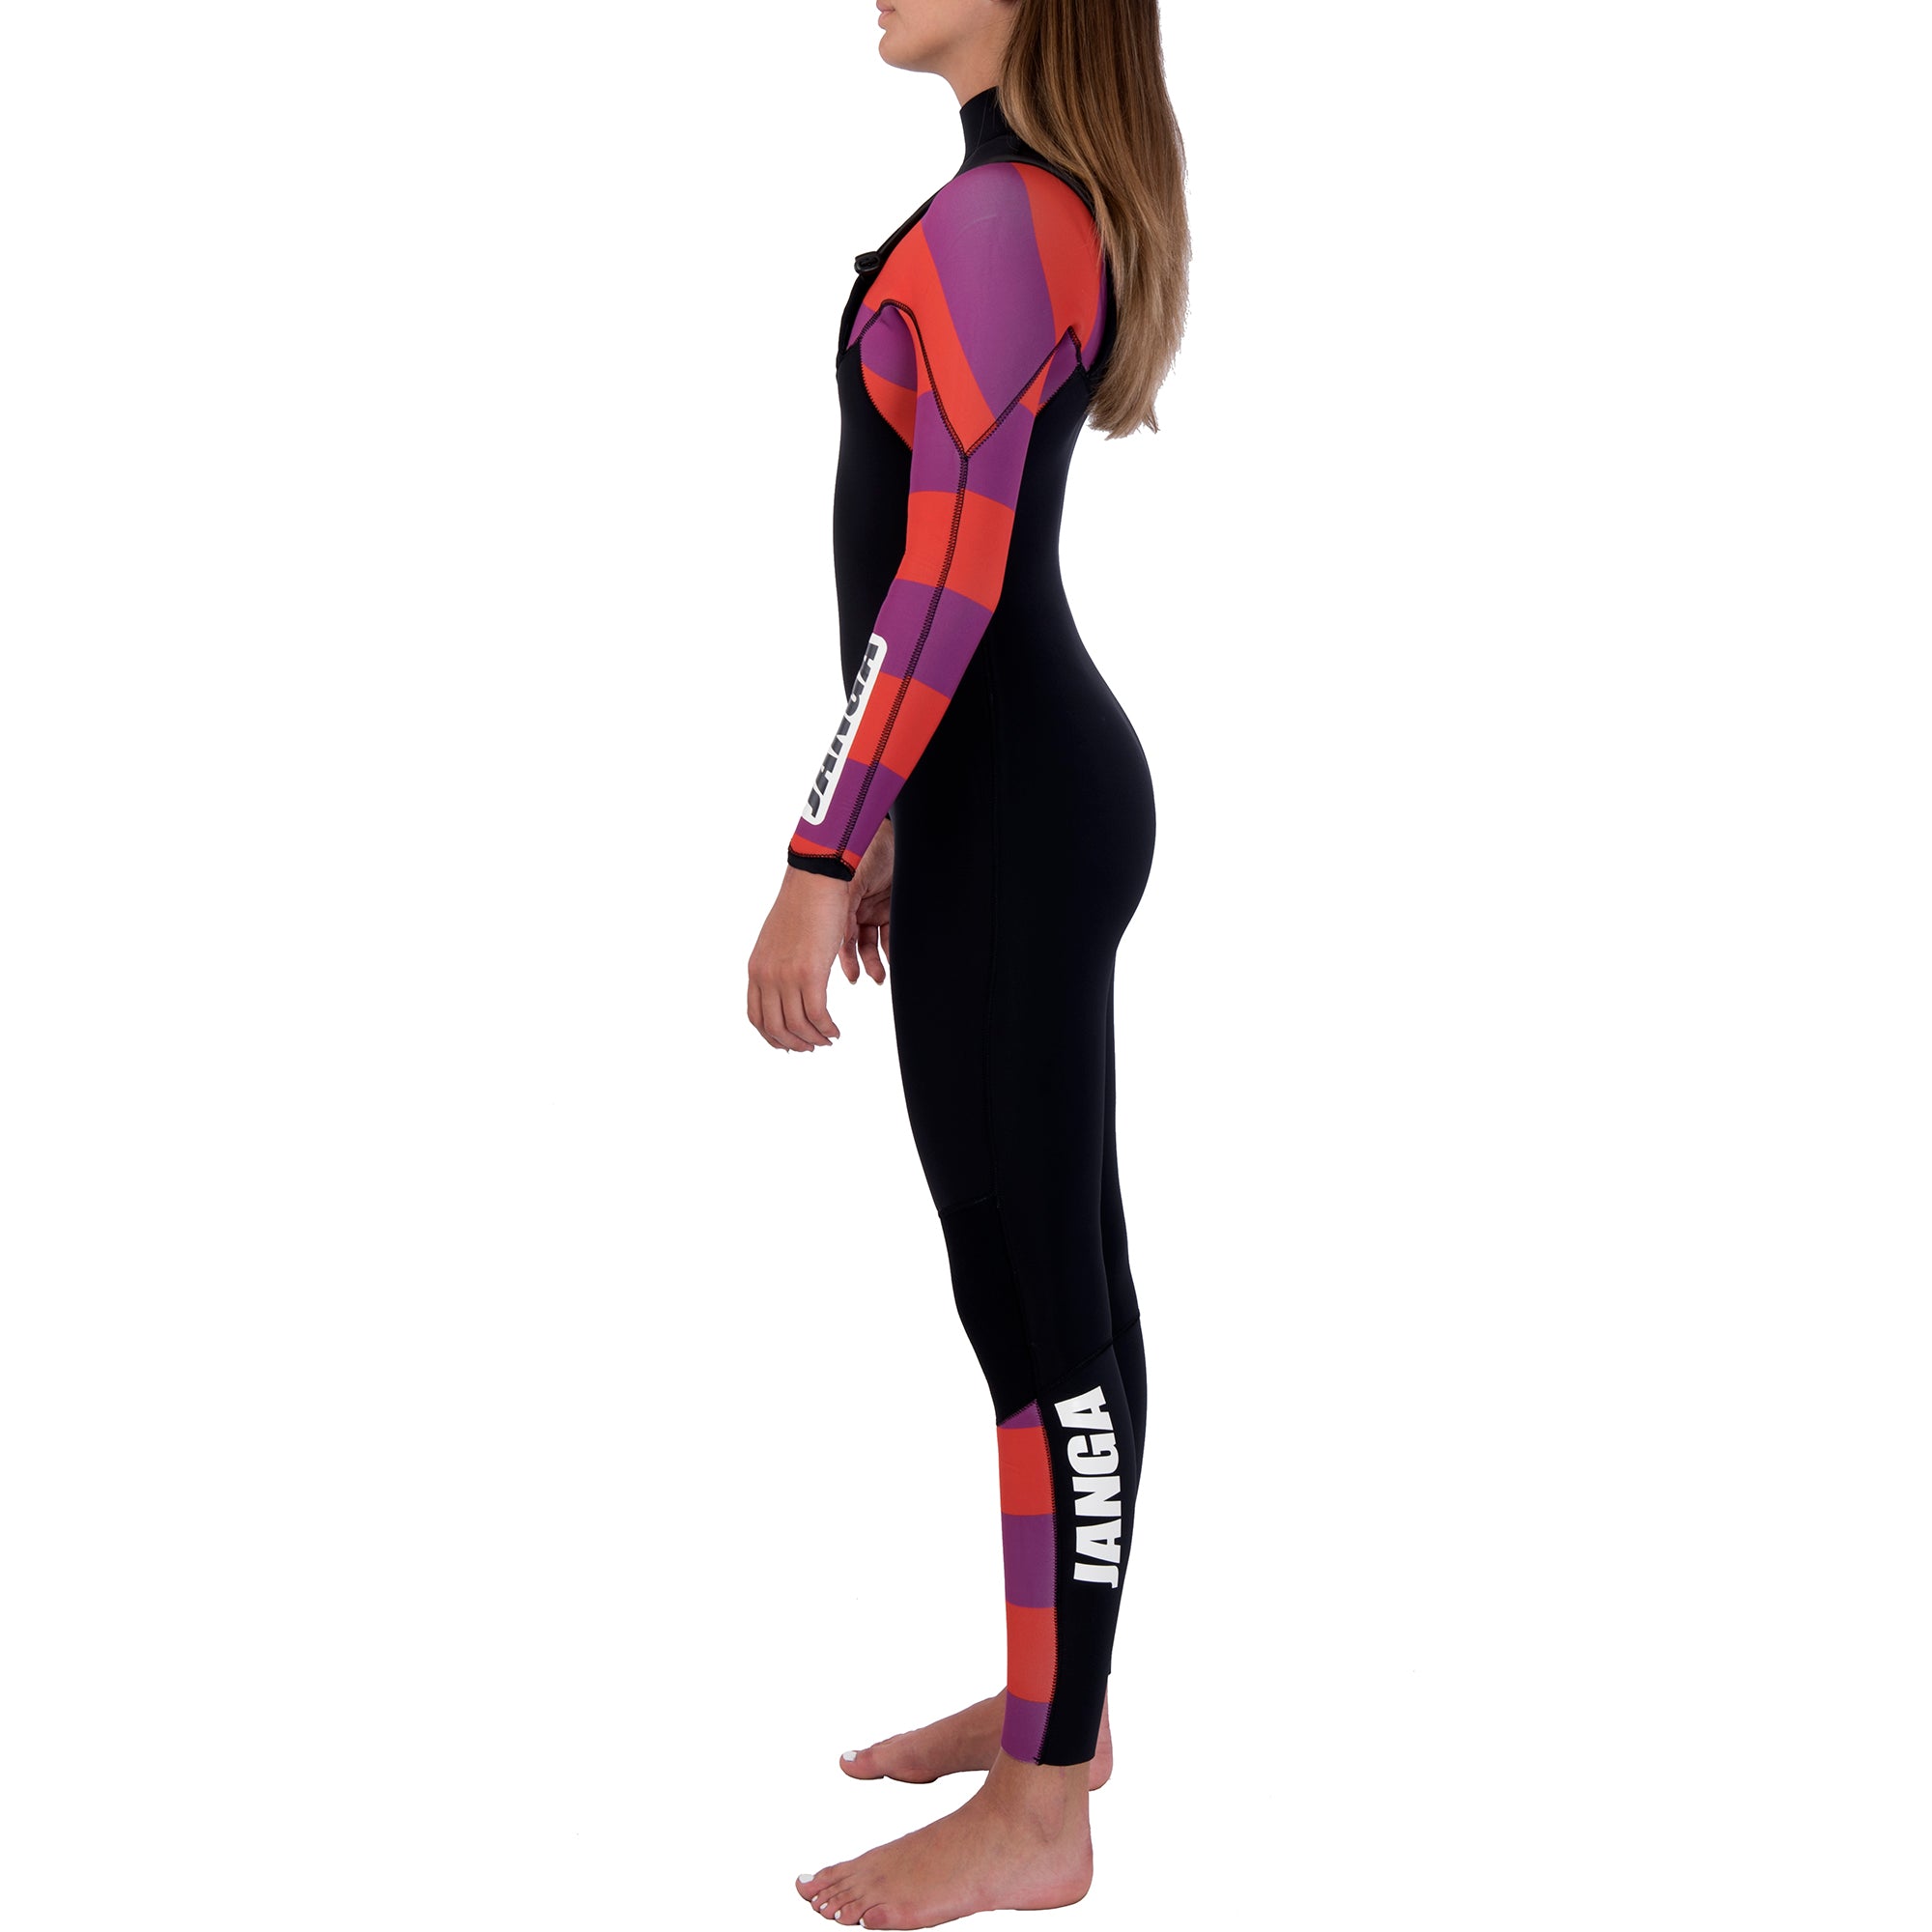 BAD SEED STRIPES WETSUIT